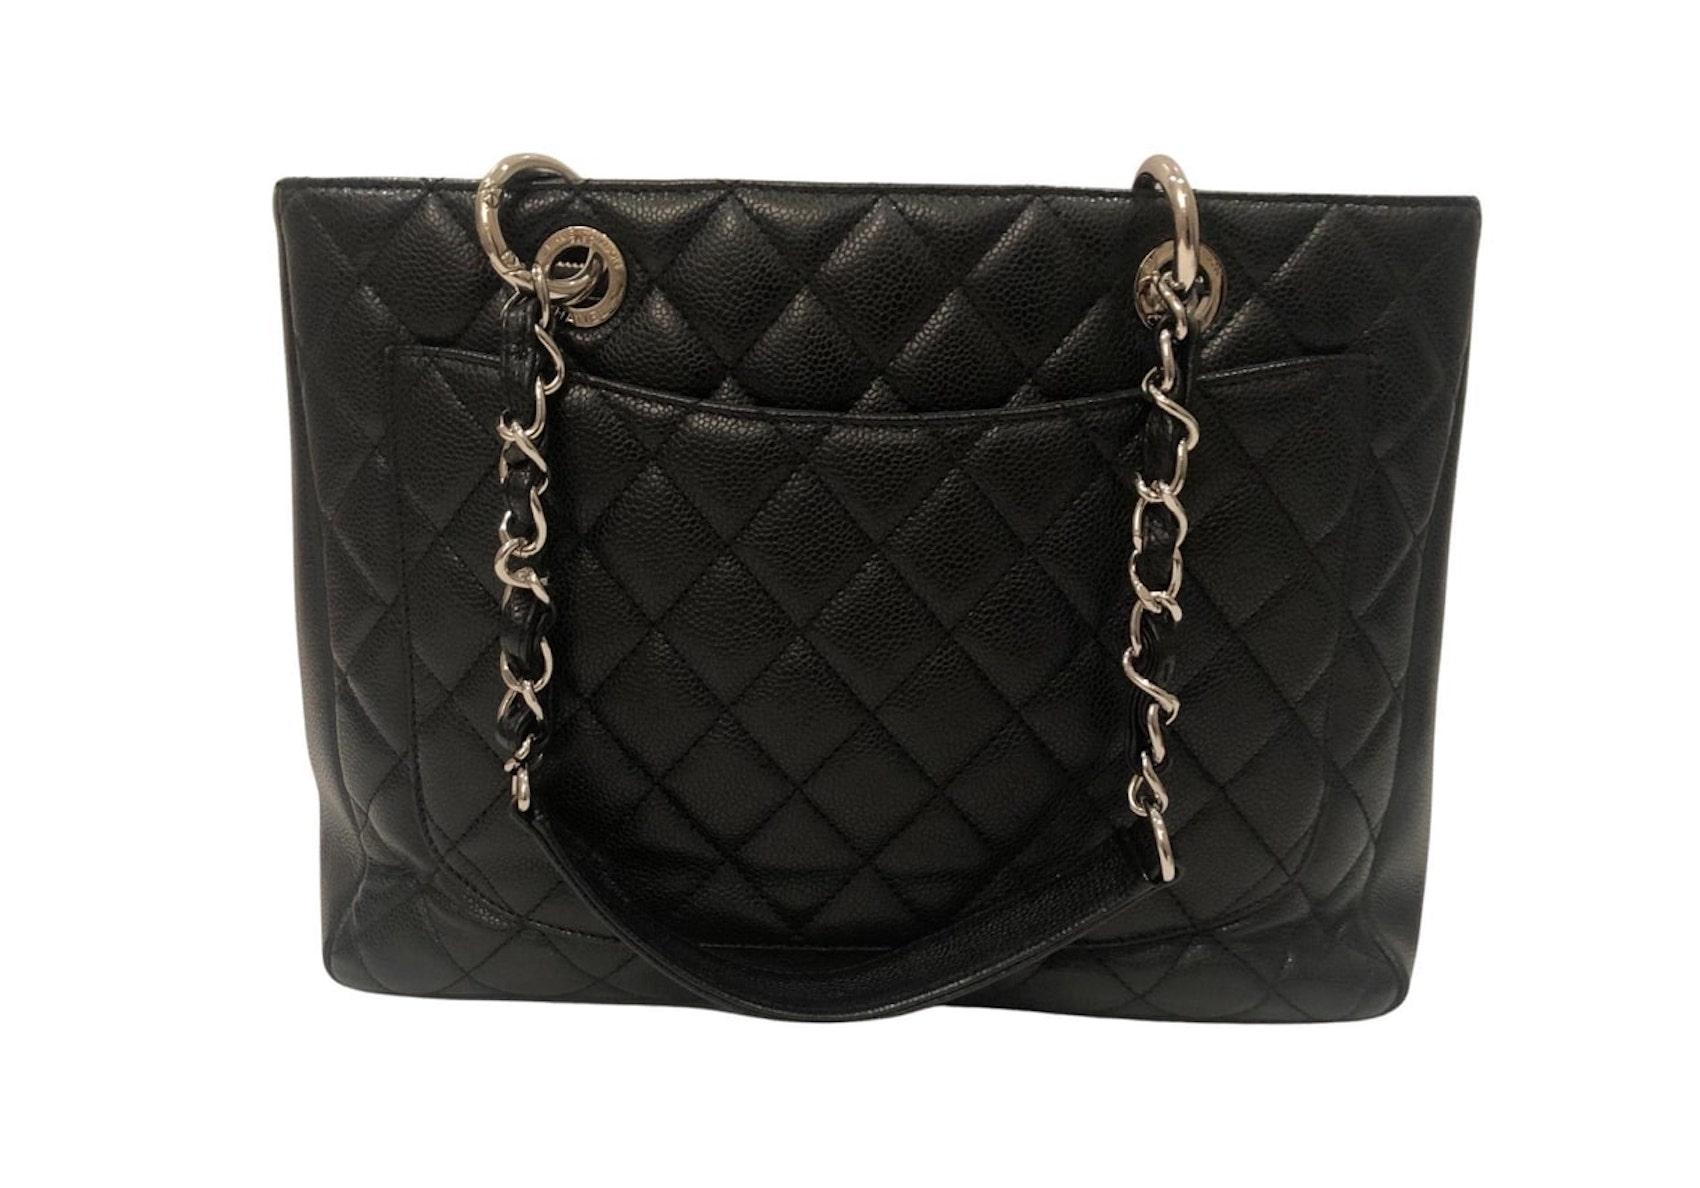 CHANEL Grand Shopping Tote GST Bag Black Caviar with Silver Hardware 2010
A timeless Chanel 2010-2011 Grand Shopping Tote bag in black with silver-tone hardware in very good condition. A classic Chanel quilted caviar leather with a large half moon